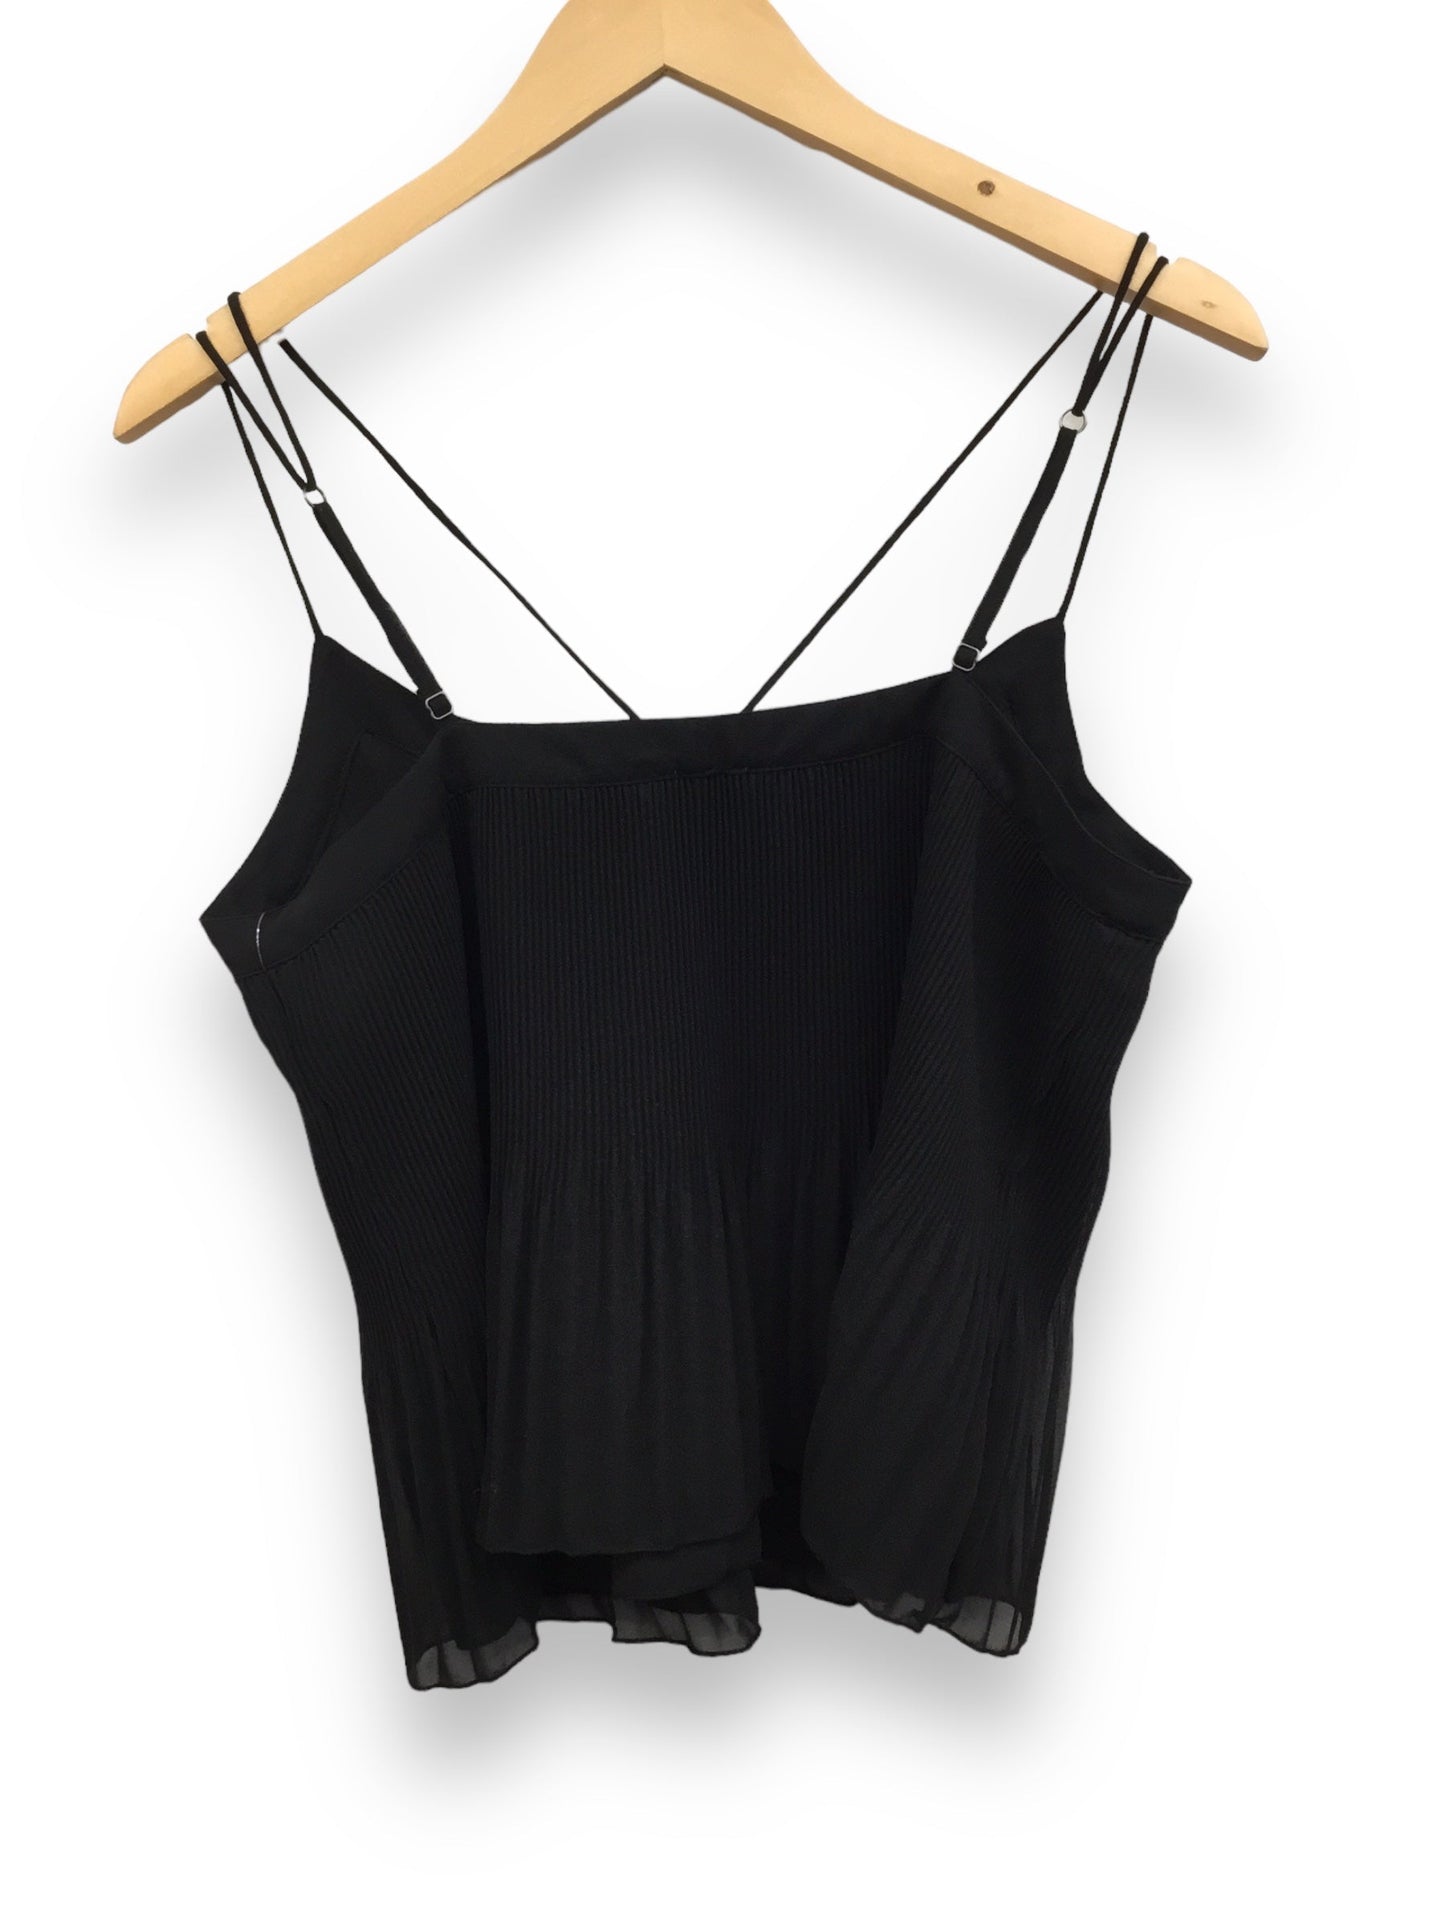 Top Sleeveless By Hollister  Size: M